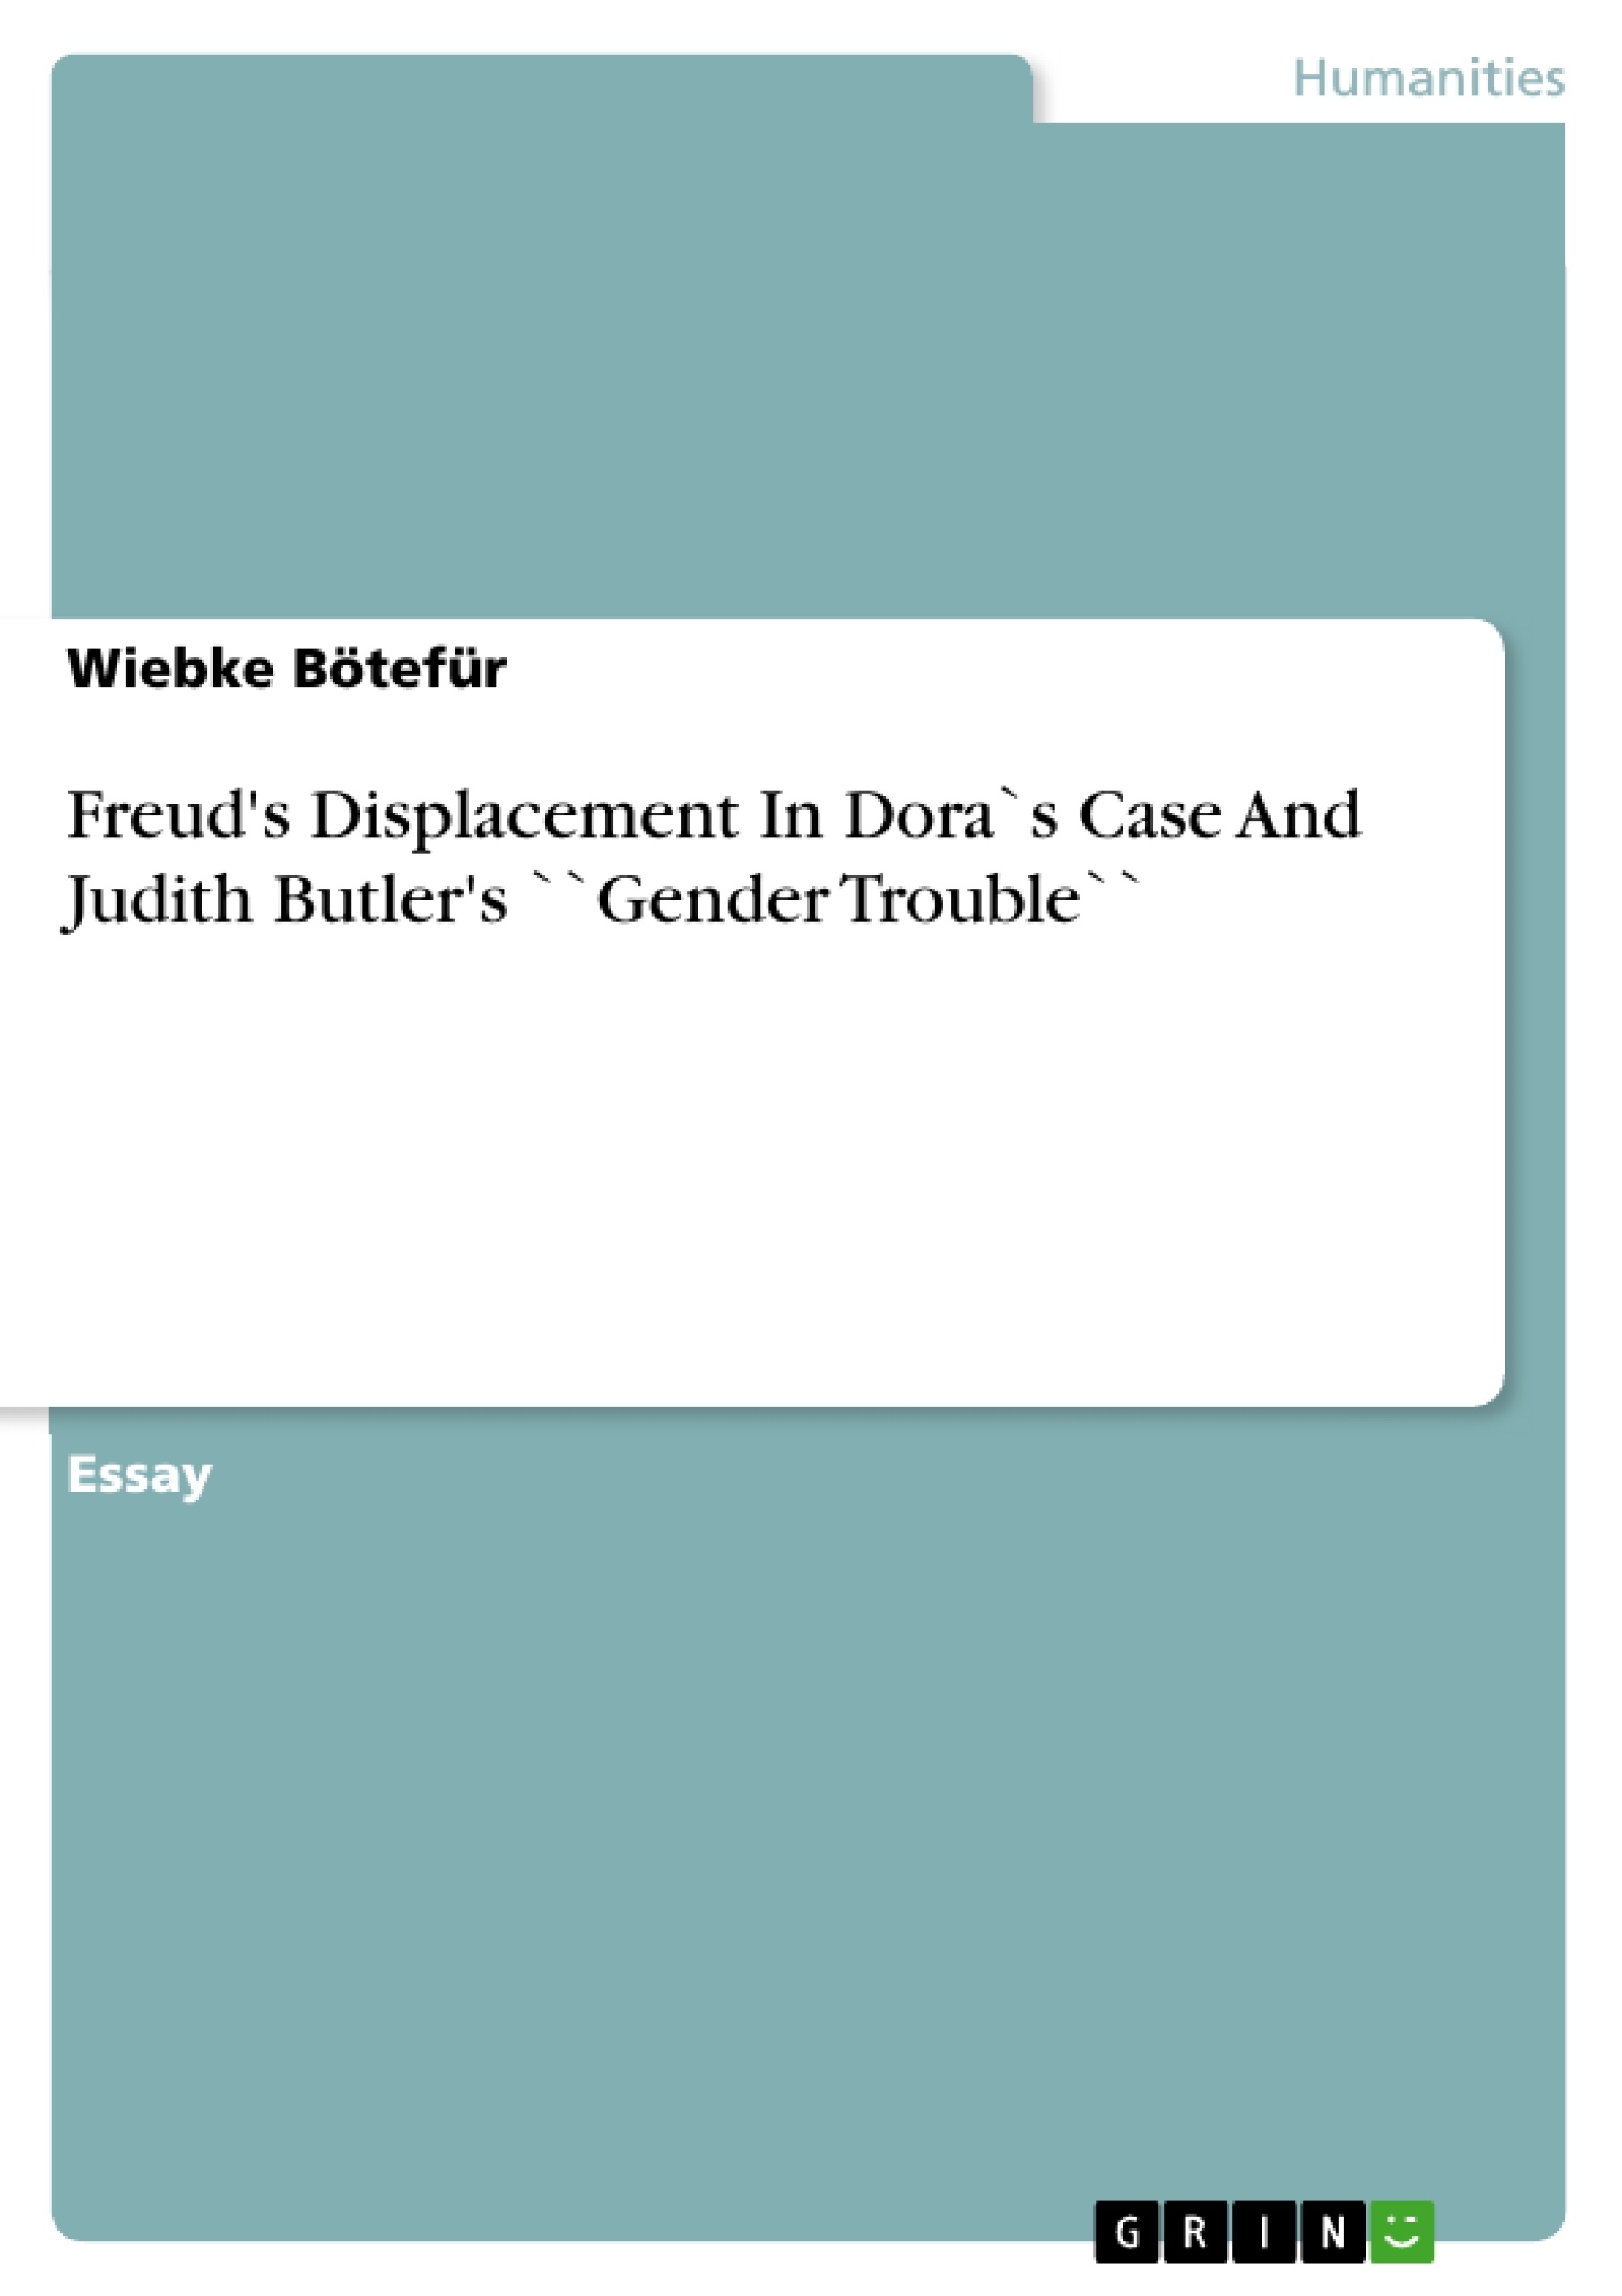 Title: Freud's Displacement In Dora`s Case And Judith Butler's ``Gender Trouble``